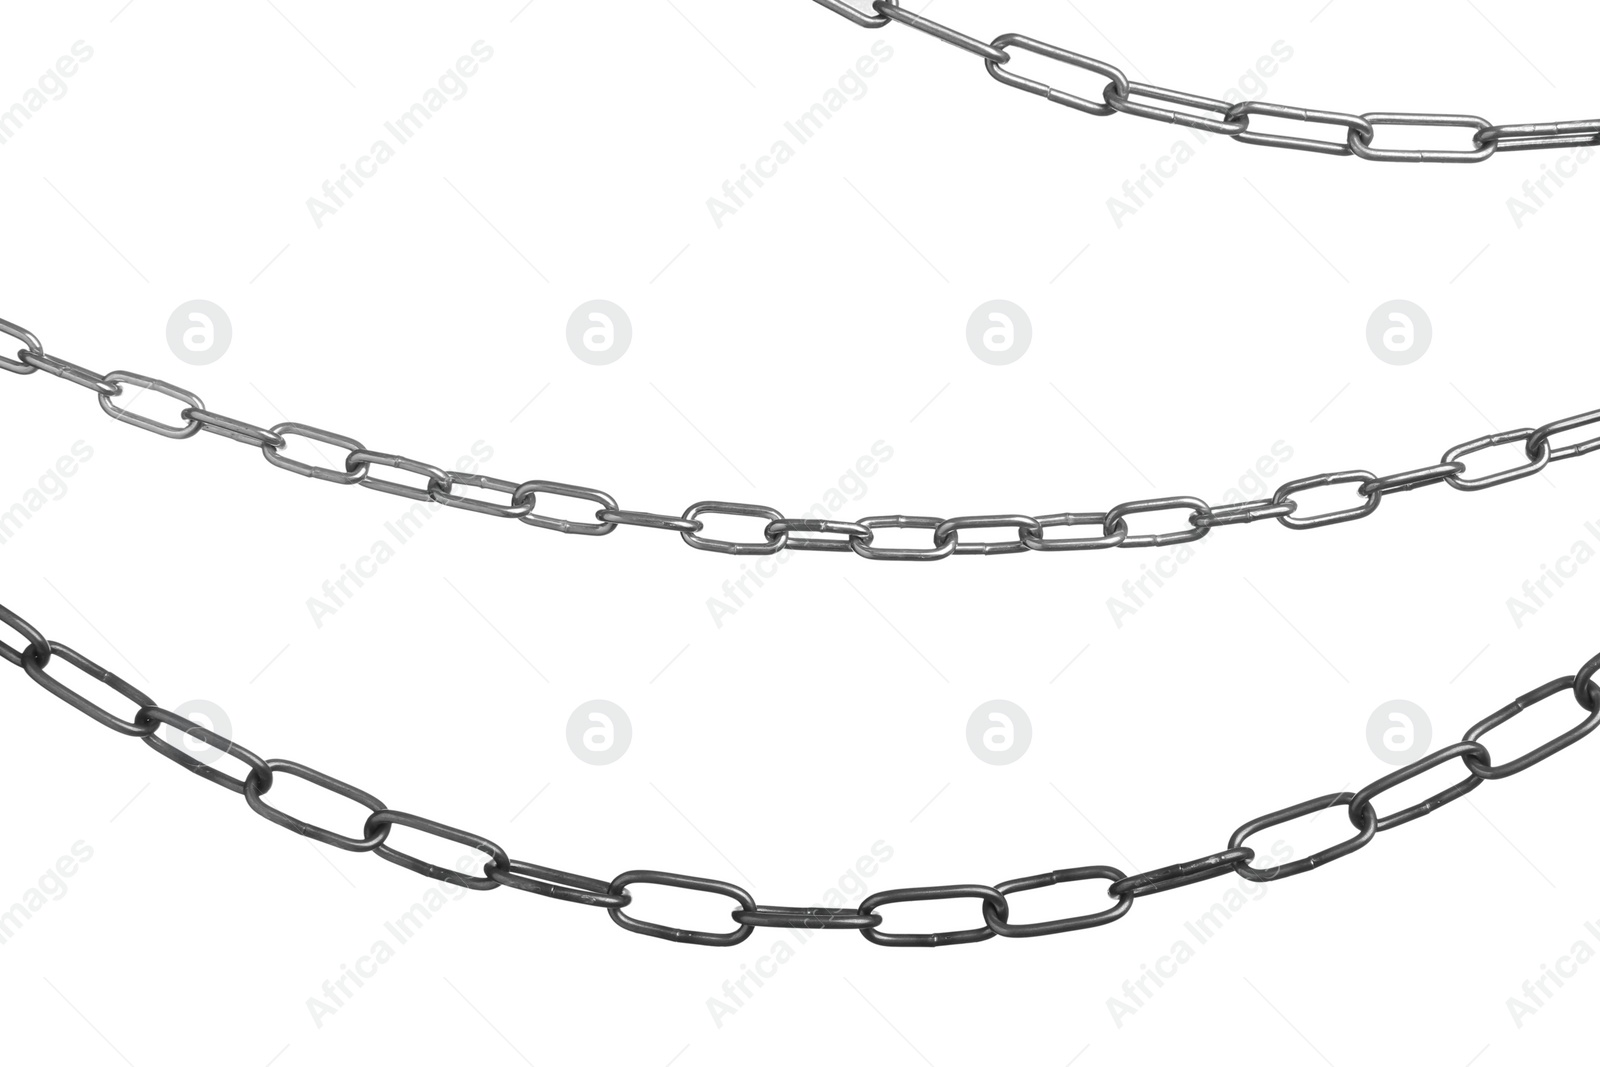 Photo of Three common metal chains isolated on white